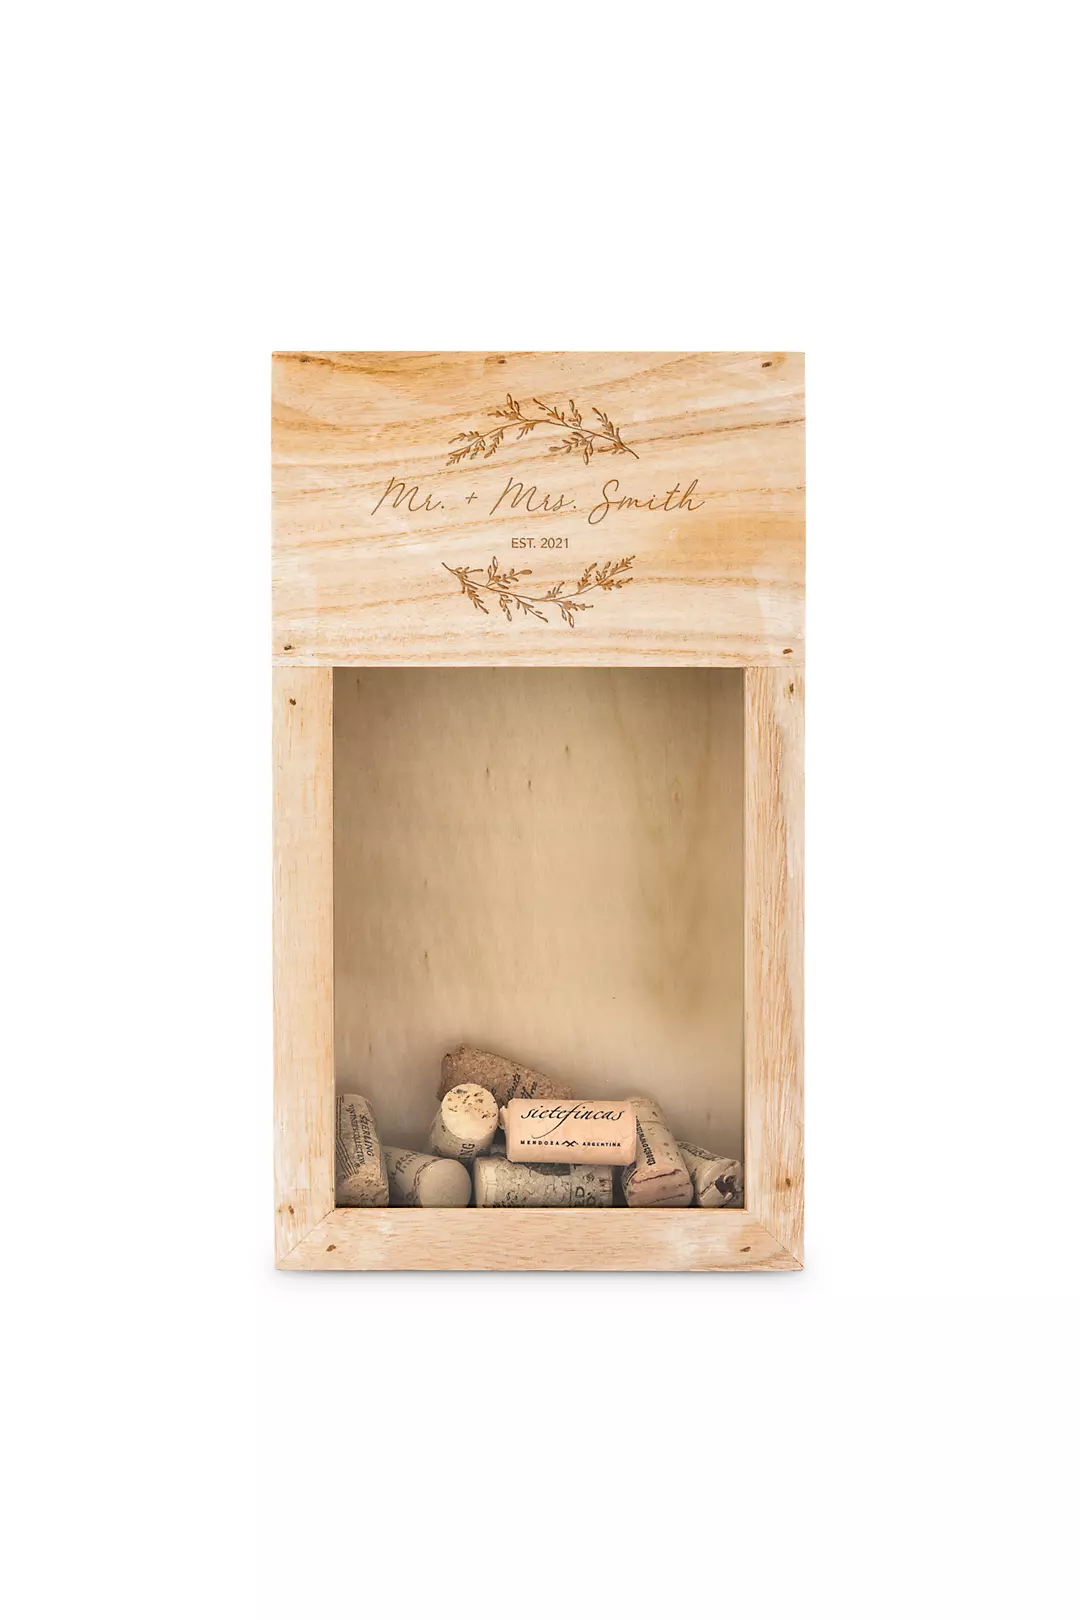 Personalized Wooden Wine Cork Holder Image 2